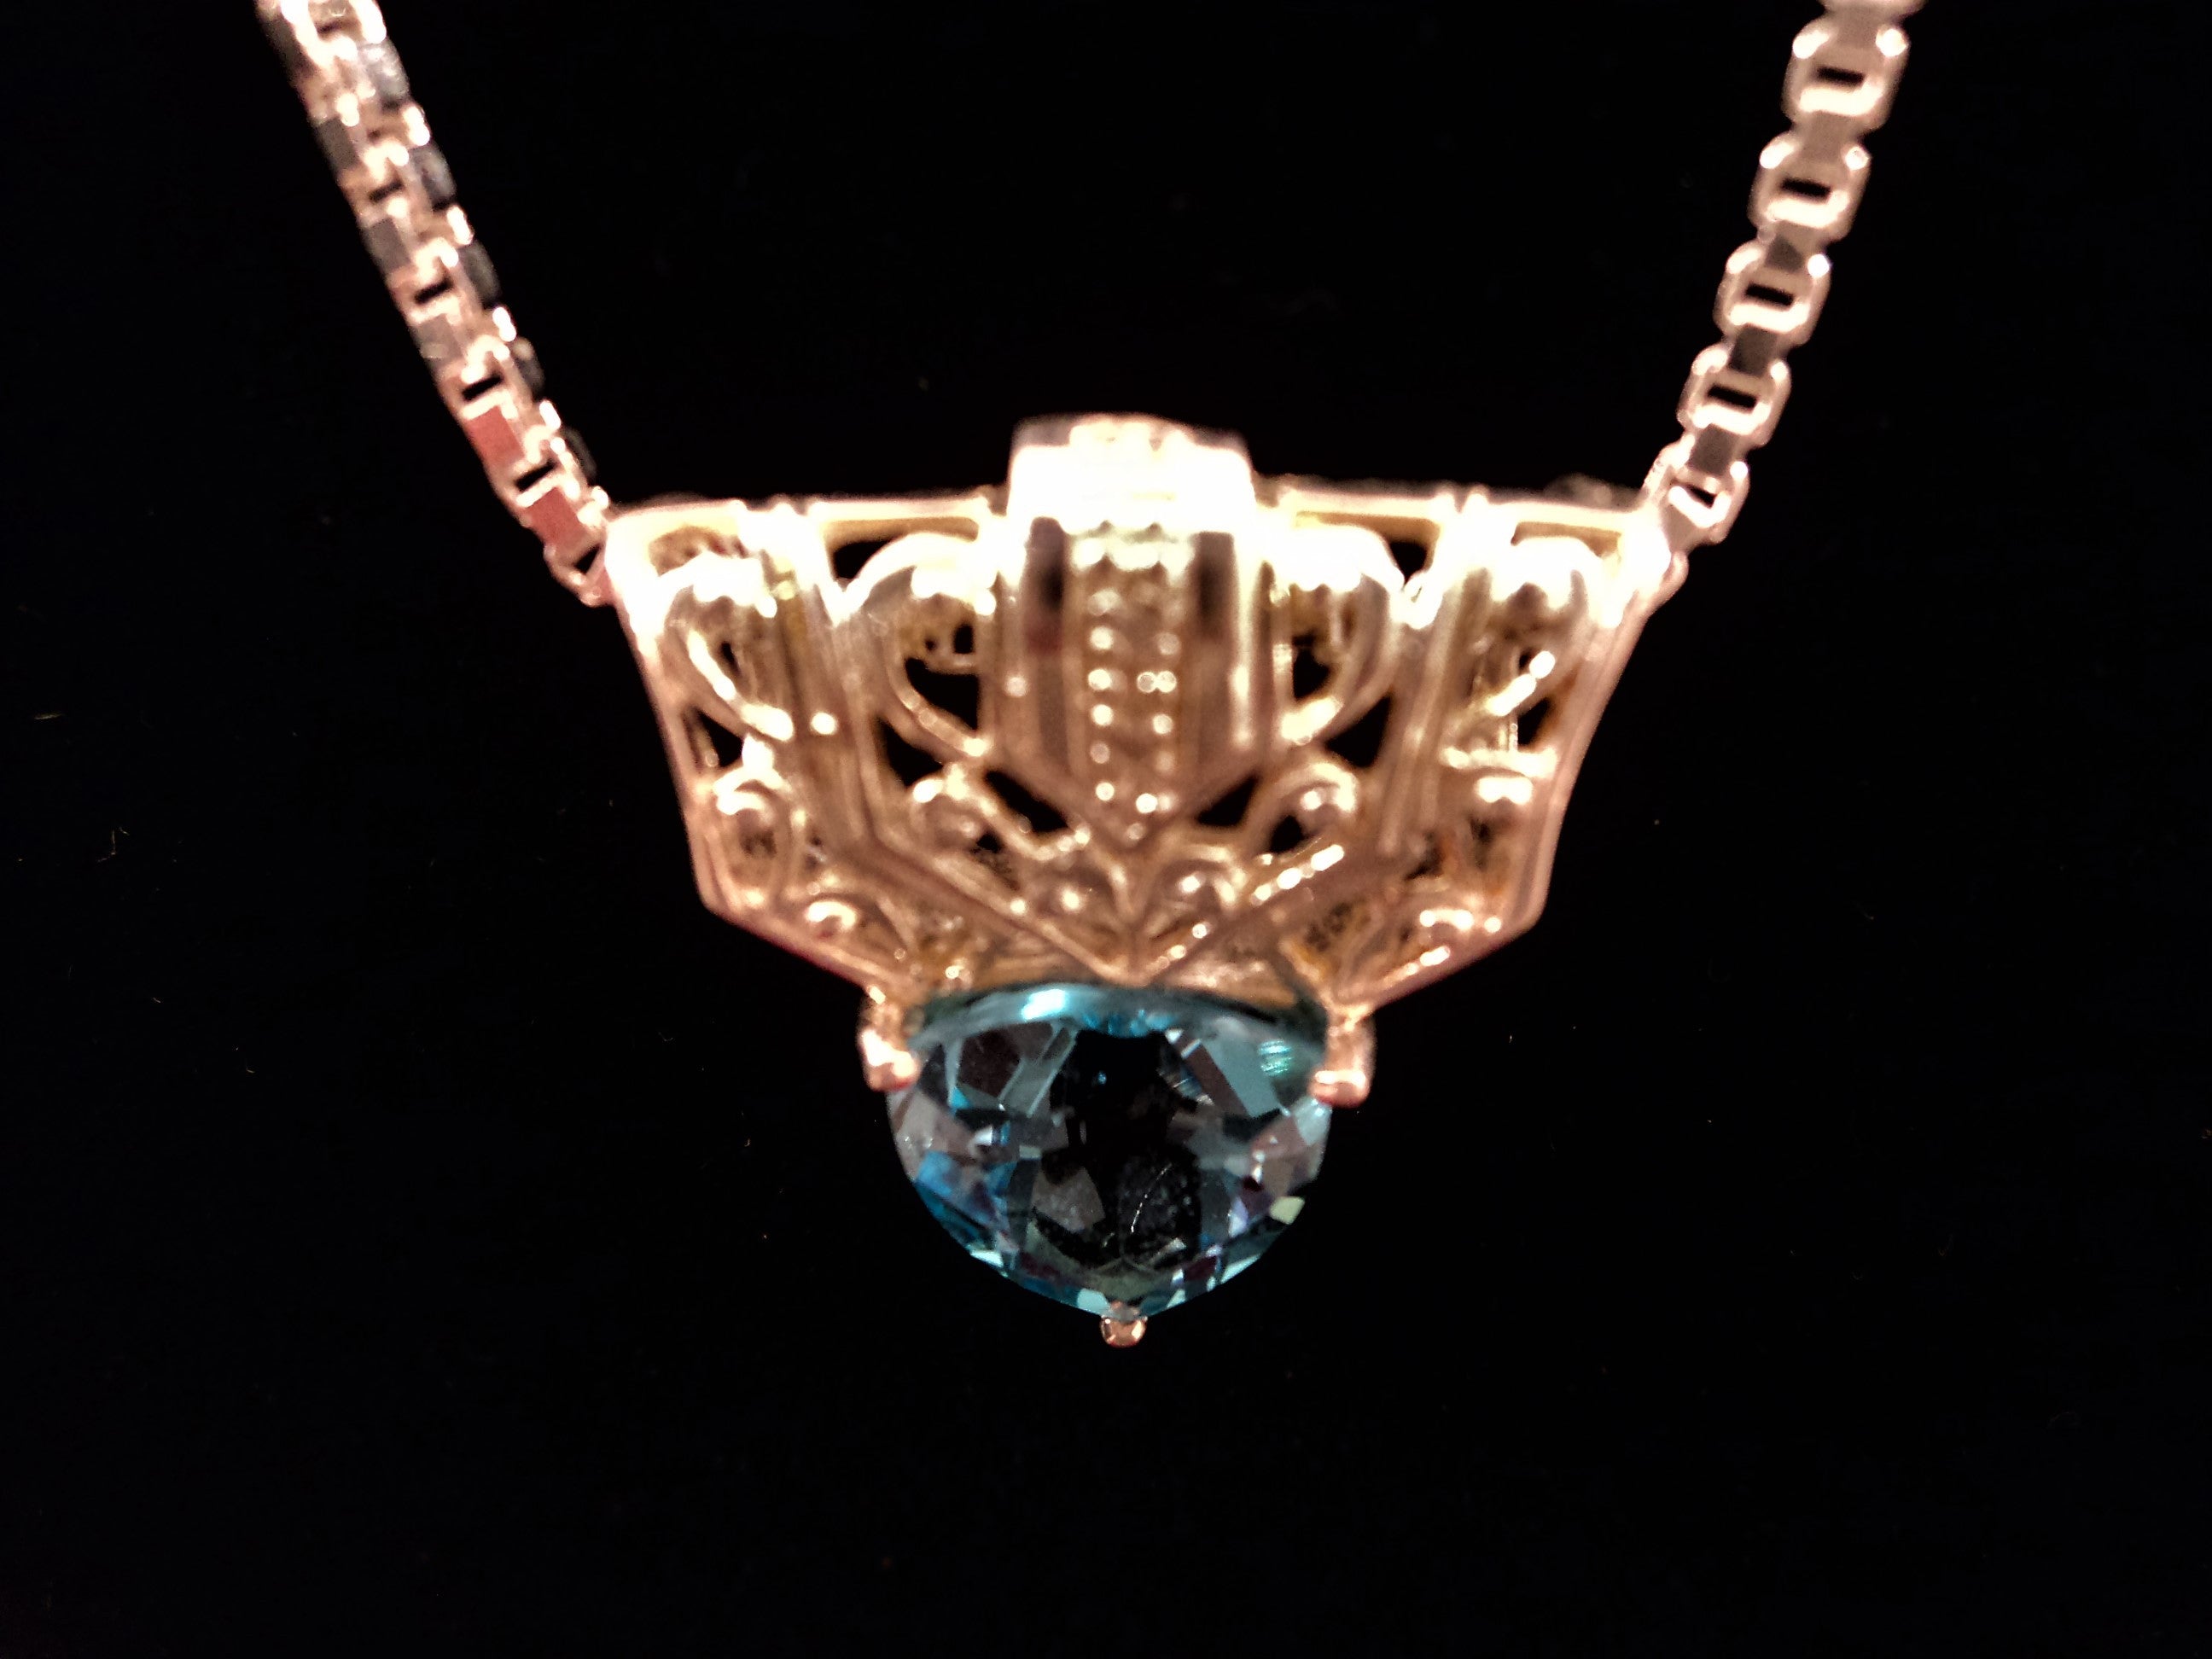 Vintage Sterling Silver and Blue Topaz Cubic Zirconia Necklace